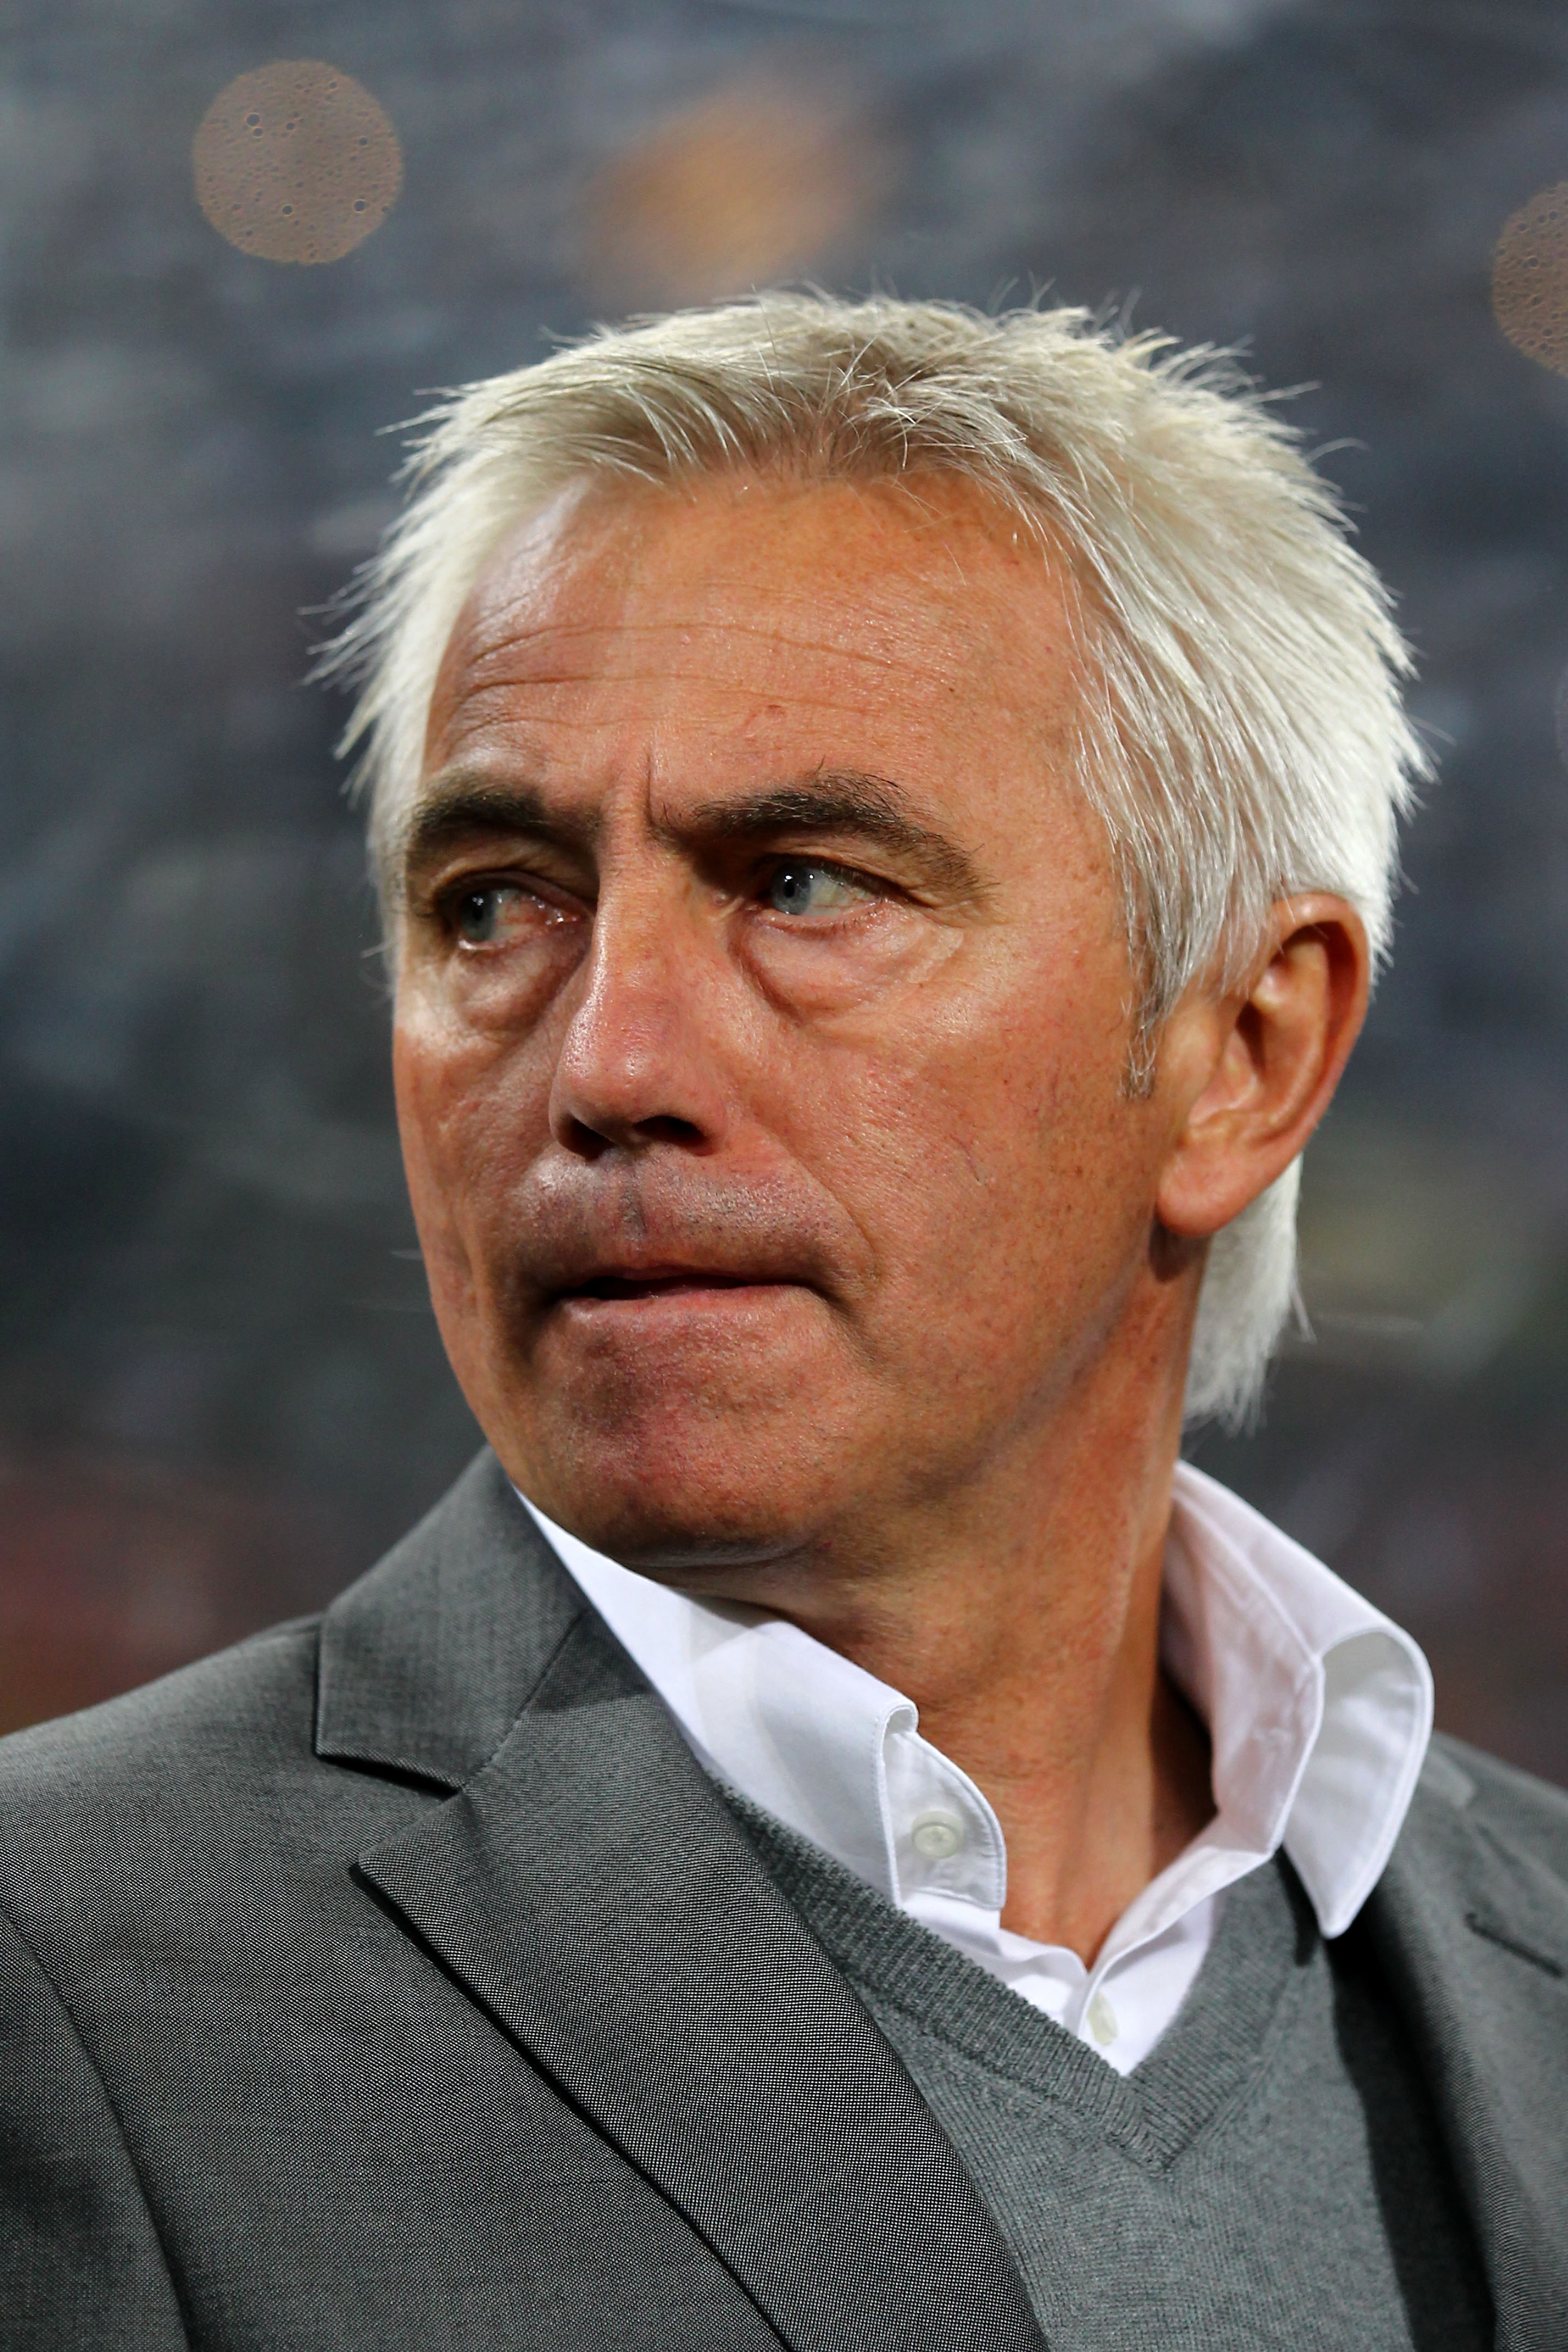 JOHANNESBURG, SOUTH AFRICA - JULY 11:  Bert van Marwijk head coach of the Netherlands looks thoughtful ahead of the 2010 FIFA World Cup South Africa Final match between Netherlands and Spain at Soccer City Stadium on July 11, 2010 in Johannesburg, South A